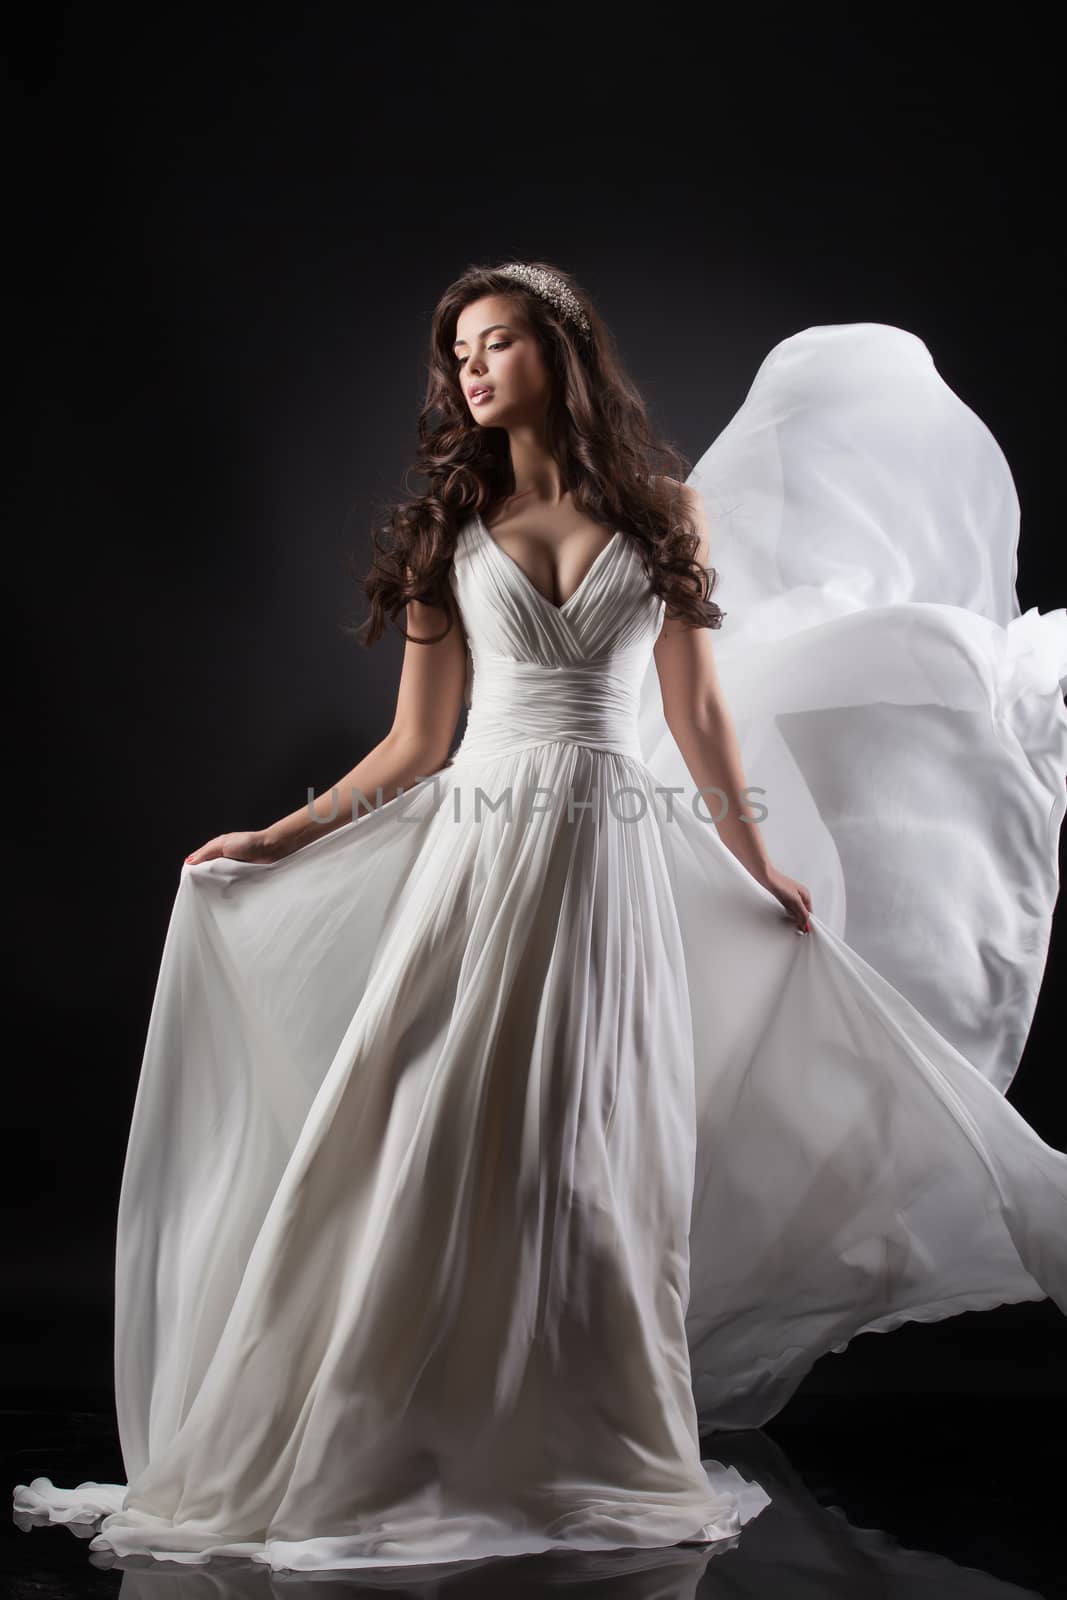 Young beautiful woman in a wedding dress on a black background